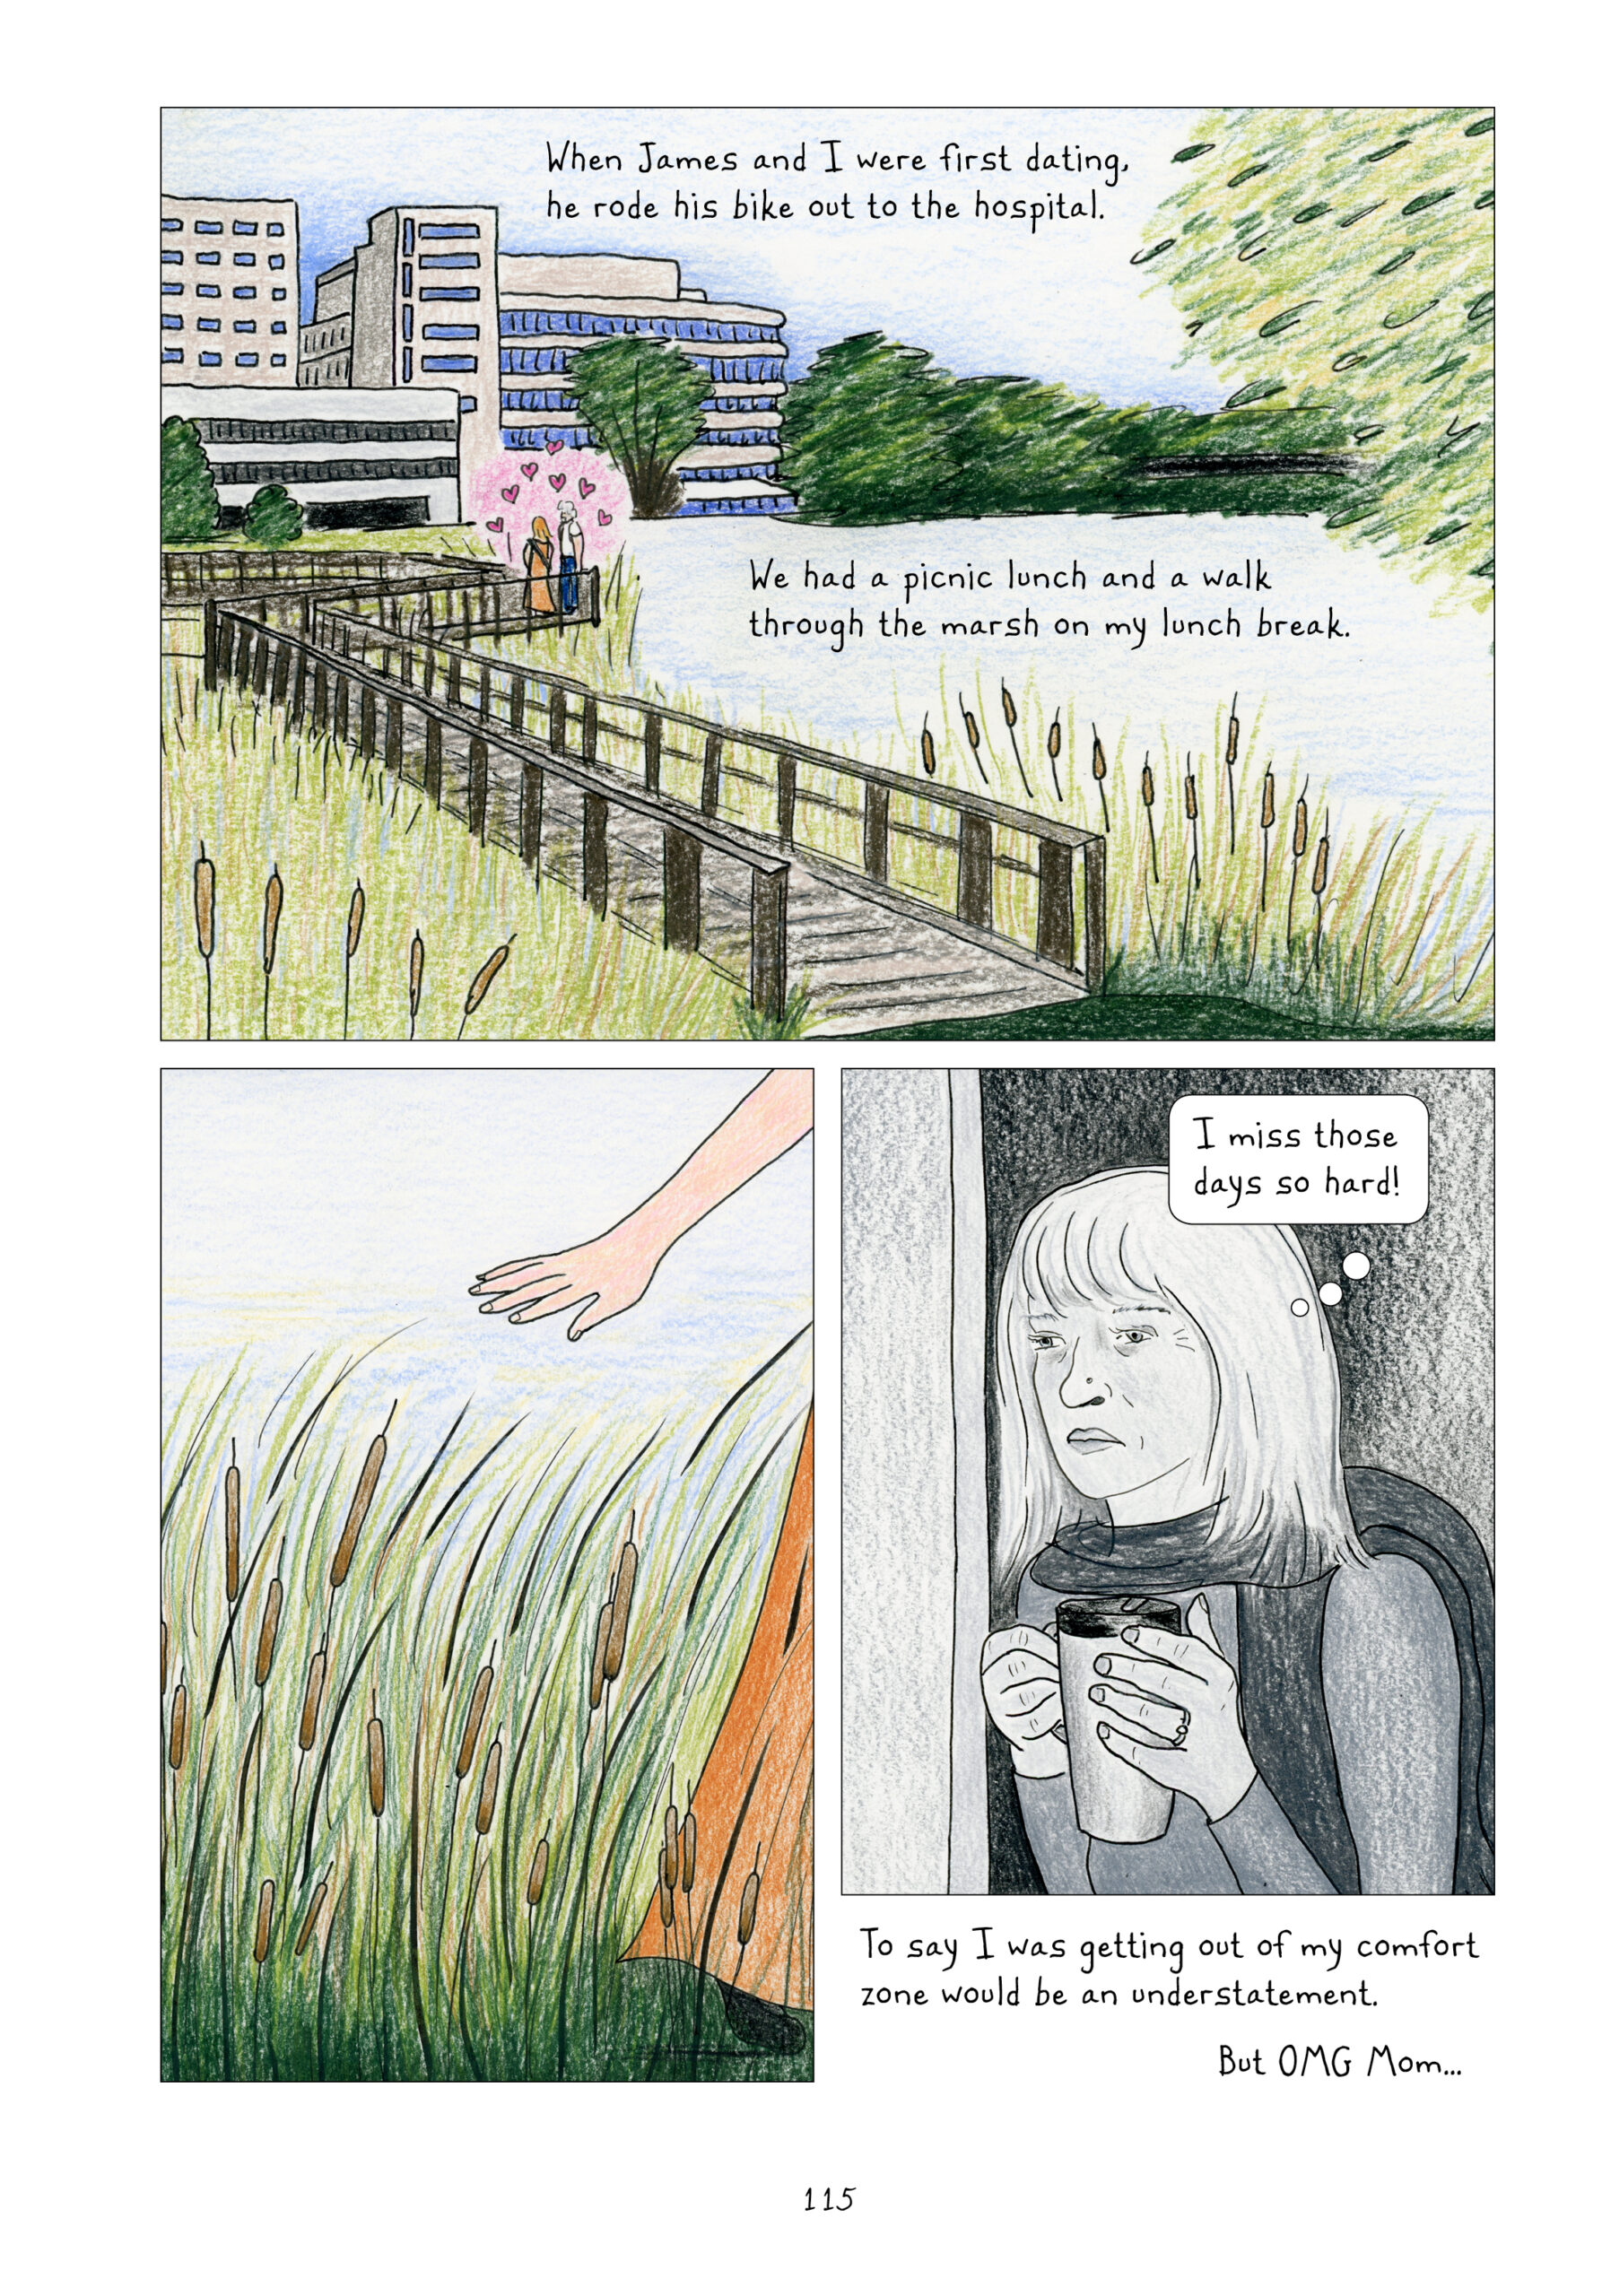 In full color, we see a view of a wooden walking bridge stretching across a marsh outside of a hospital building. Deep in the bridge, looking tiny in the landscape scene, Lynn and James stand next to each other surrounded by a pink aura decorated with little hearts. 

Lynn narrates, â€œWhen James and I were first dating, he rode his bike out to the hospital. We had a picnic lunch and a walk through the marsh on my lunch break.â€

We zoom in on presumably Lynnâ€™s hand trailing behind her, along with the bottom skirt of her orange dress, as she walks past marsh reeds. 

Back in gray and white, a medium shot shows Lynn staring into the distance, clutching a travel coffee mug and looking solemnly nostalgic. She thinks to herself, â€œI miss those days so hard!â€

Lynn then narrates, â€œTo say I was getting out of my comfort zone would be an understatement. But OMG Momâ€¦â€